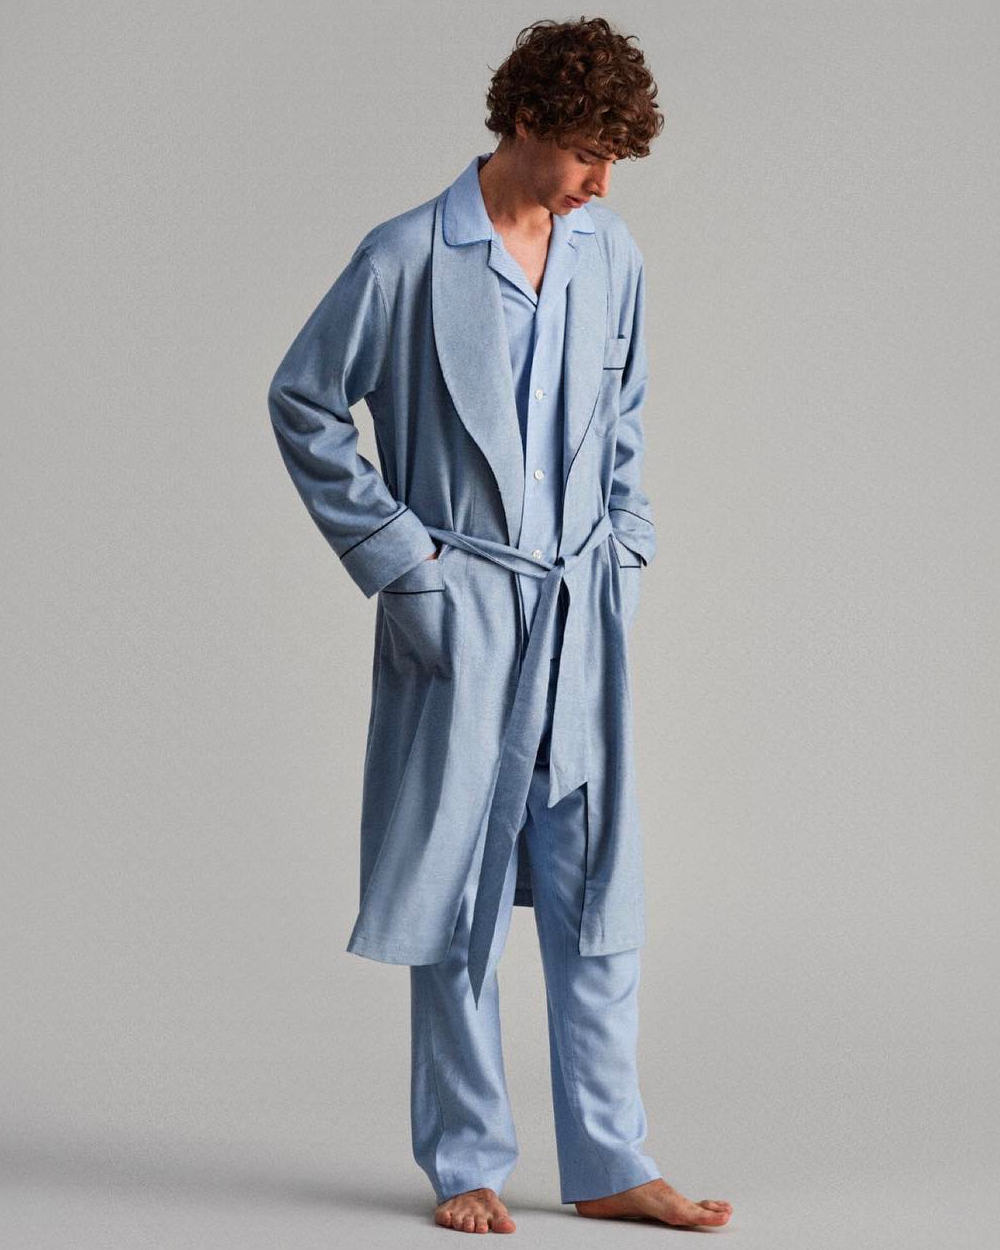 Man wearing luxury tailored sky blue pajamas and shawl collar robe by Thom Sweeney